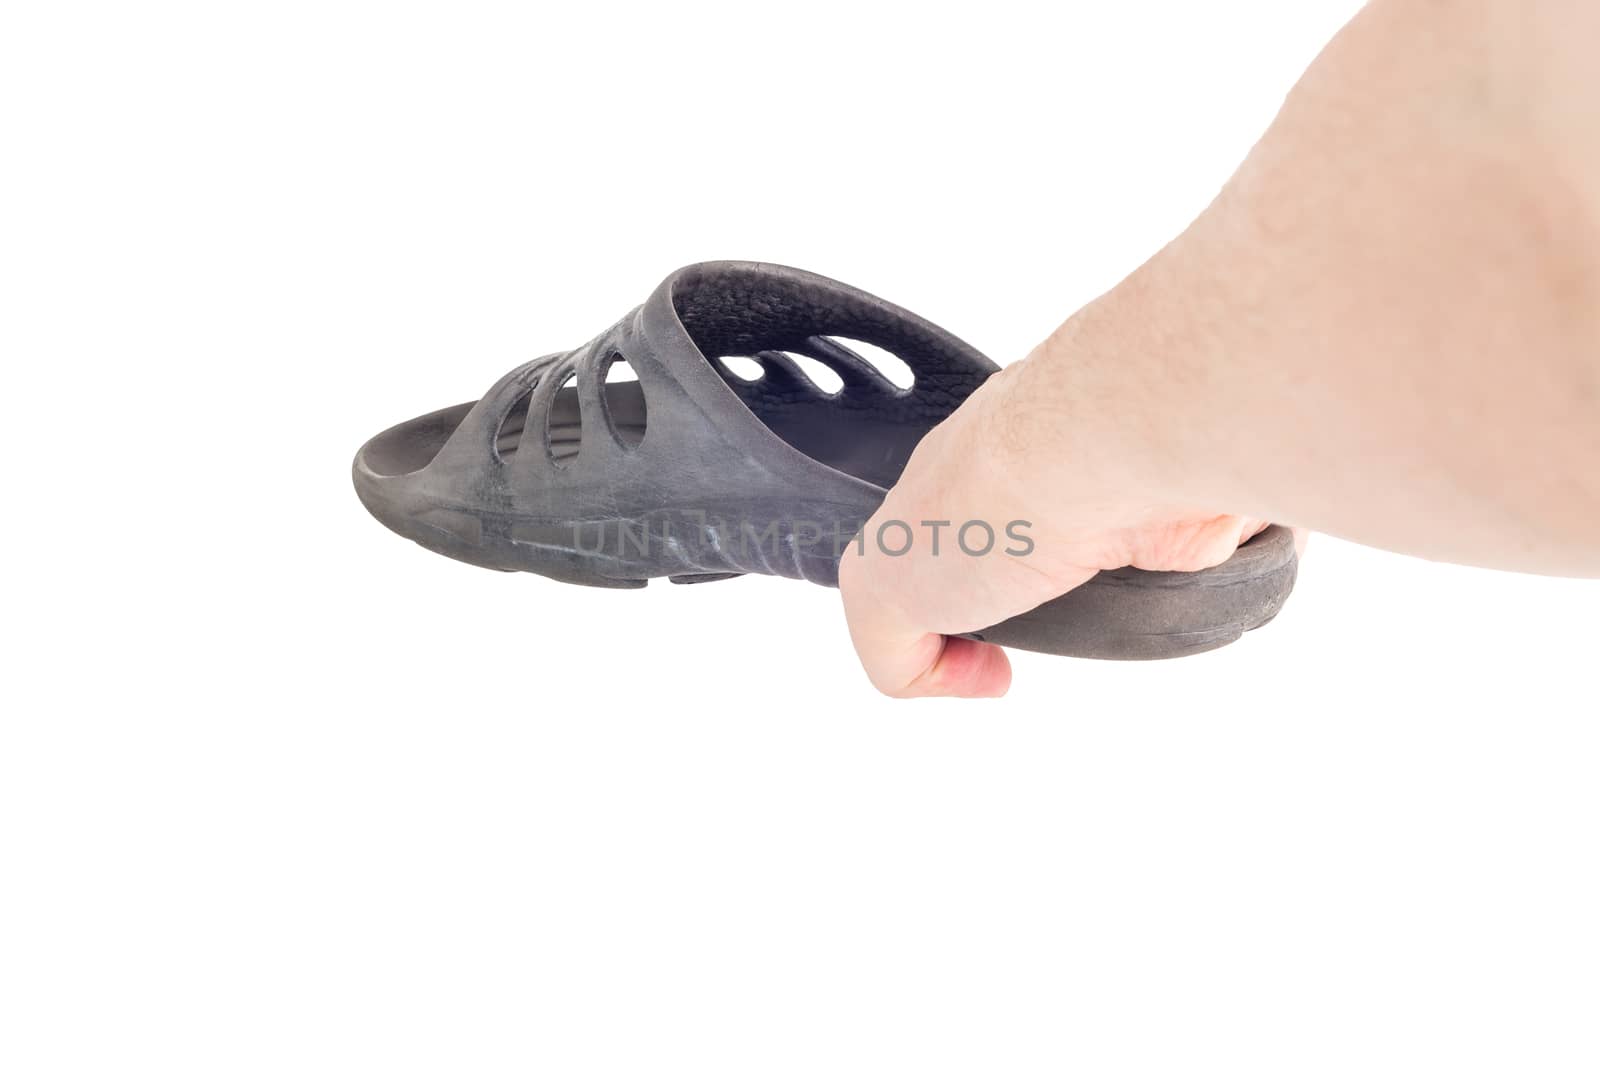 caucasian hand holding black rubber slipper like weapon against cockroach.